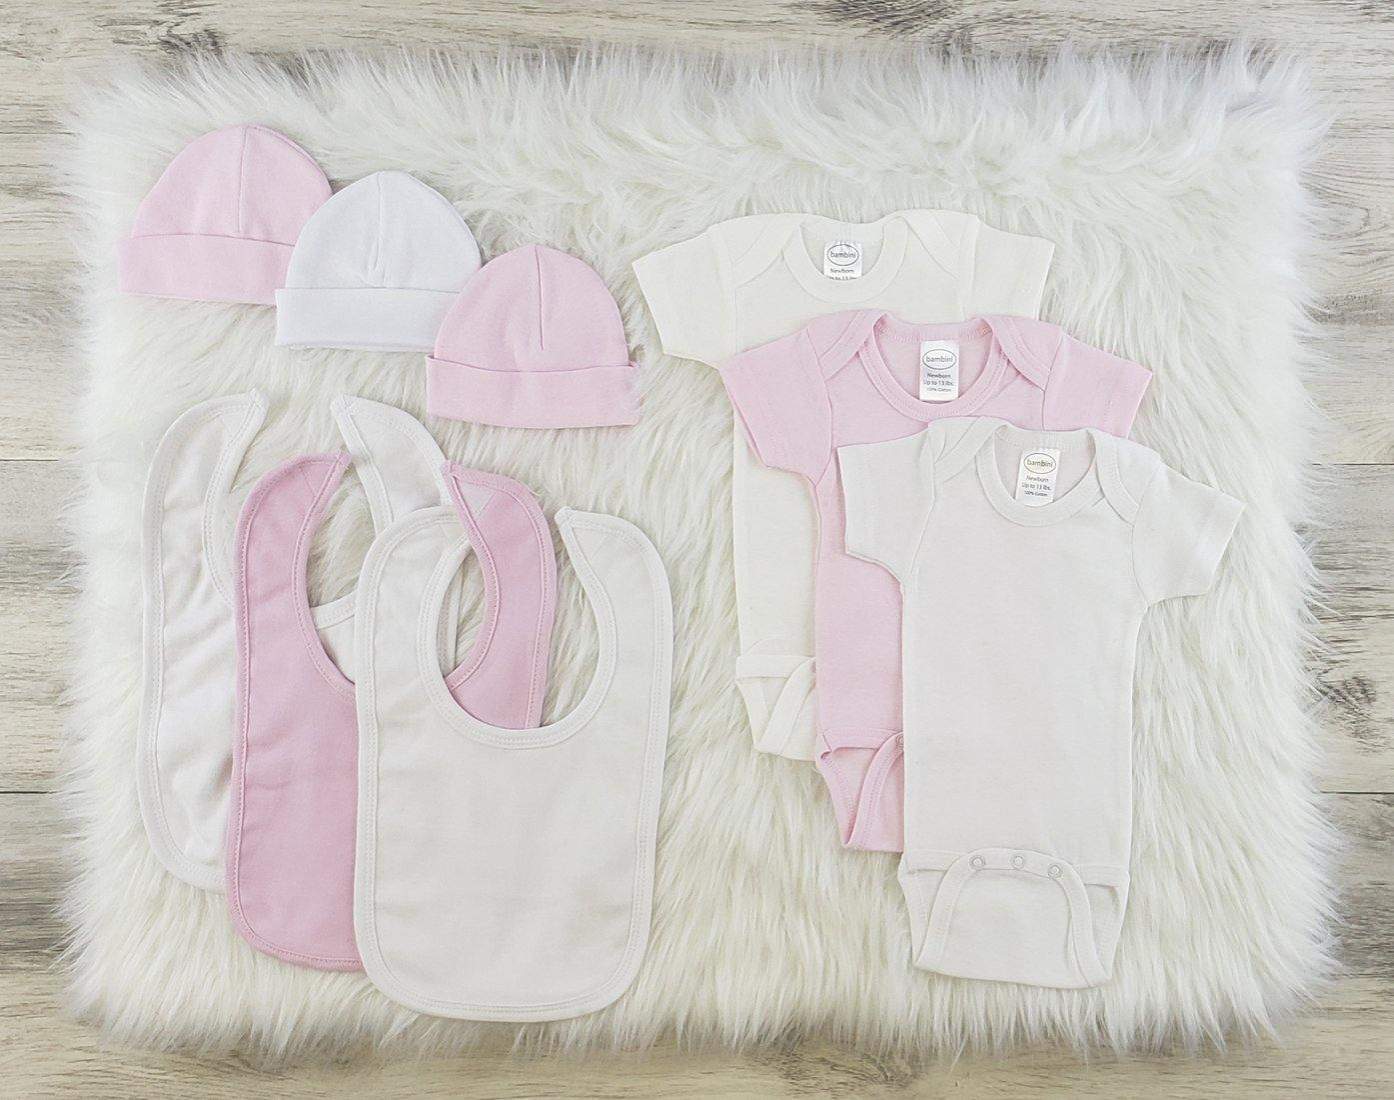 Bambini 9 Pc Girl Layette Bibs, Beanies, Onesies Baby Clothes Set (NB,S,M,L)-Bambini-Baby Clothes,Baby Clothing Set,Beanies,Bibs,Layette Sets,Onesies